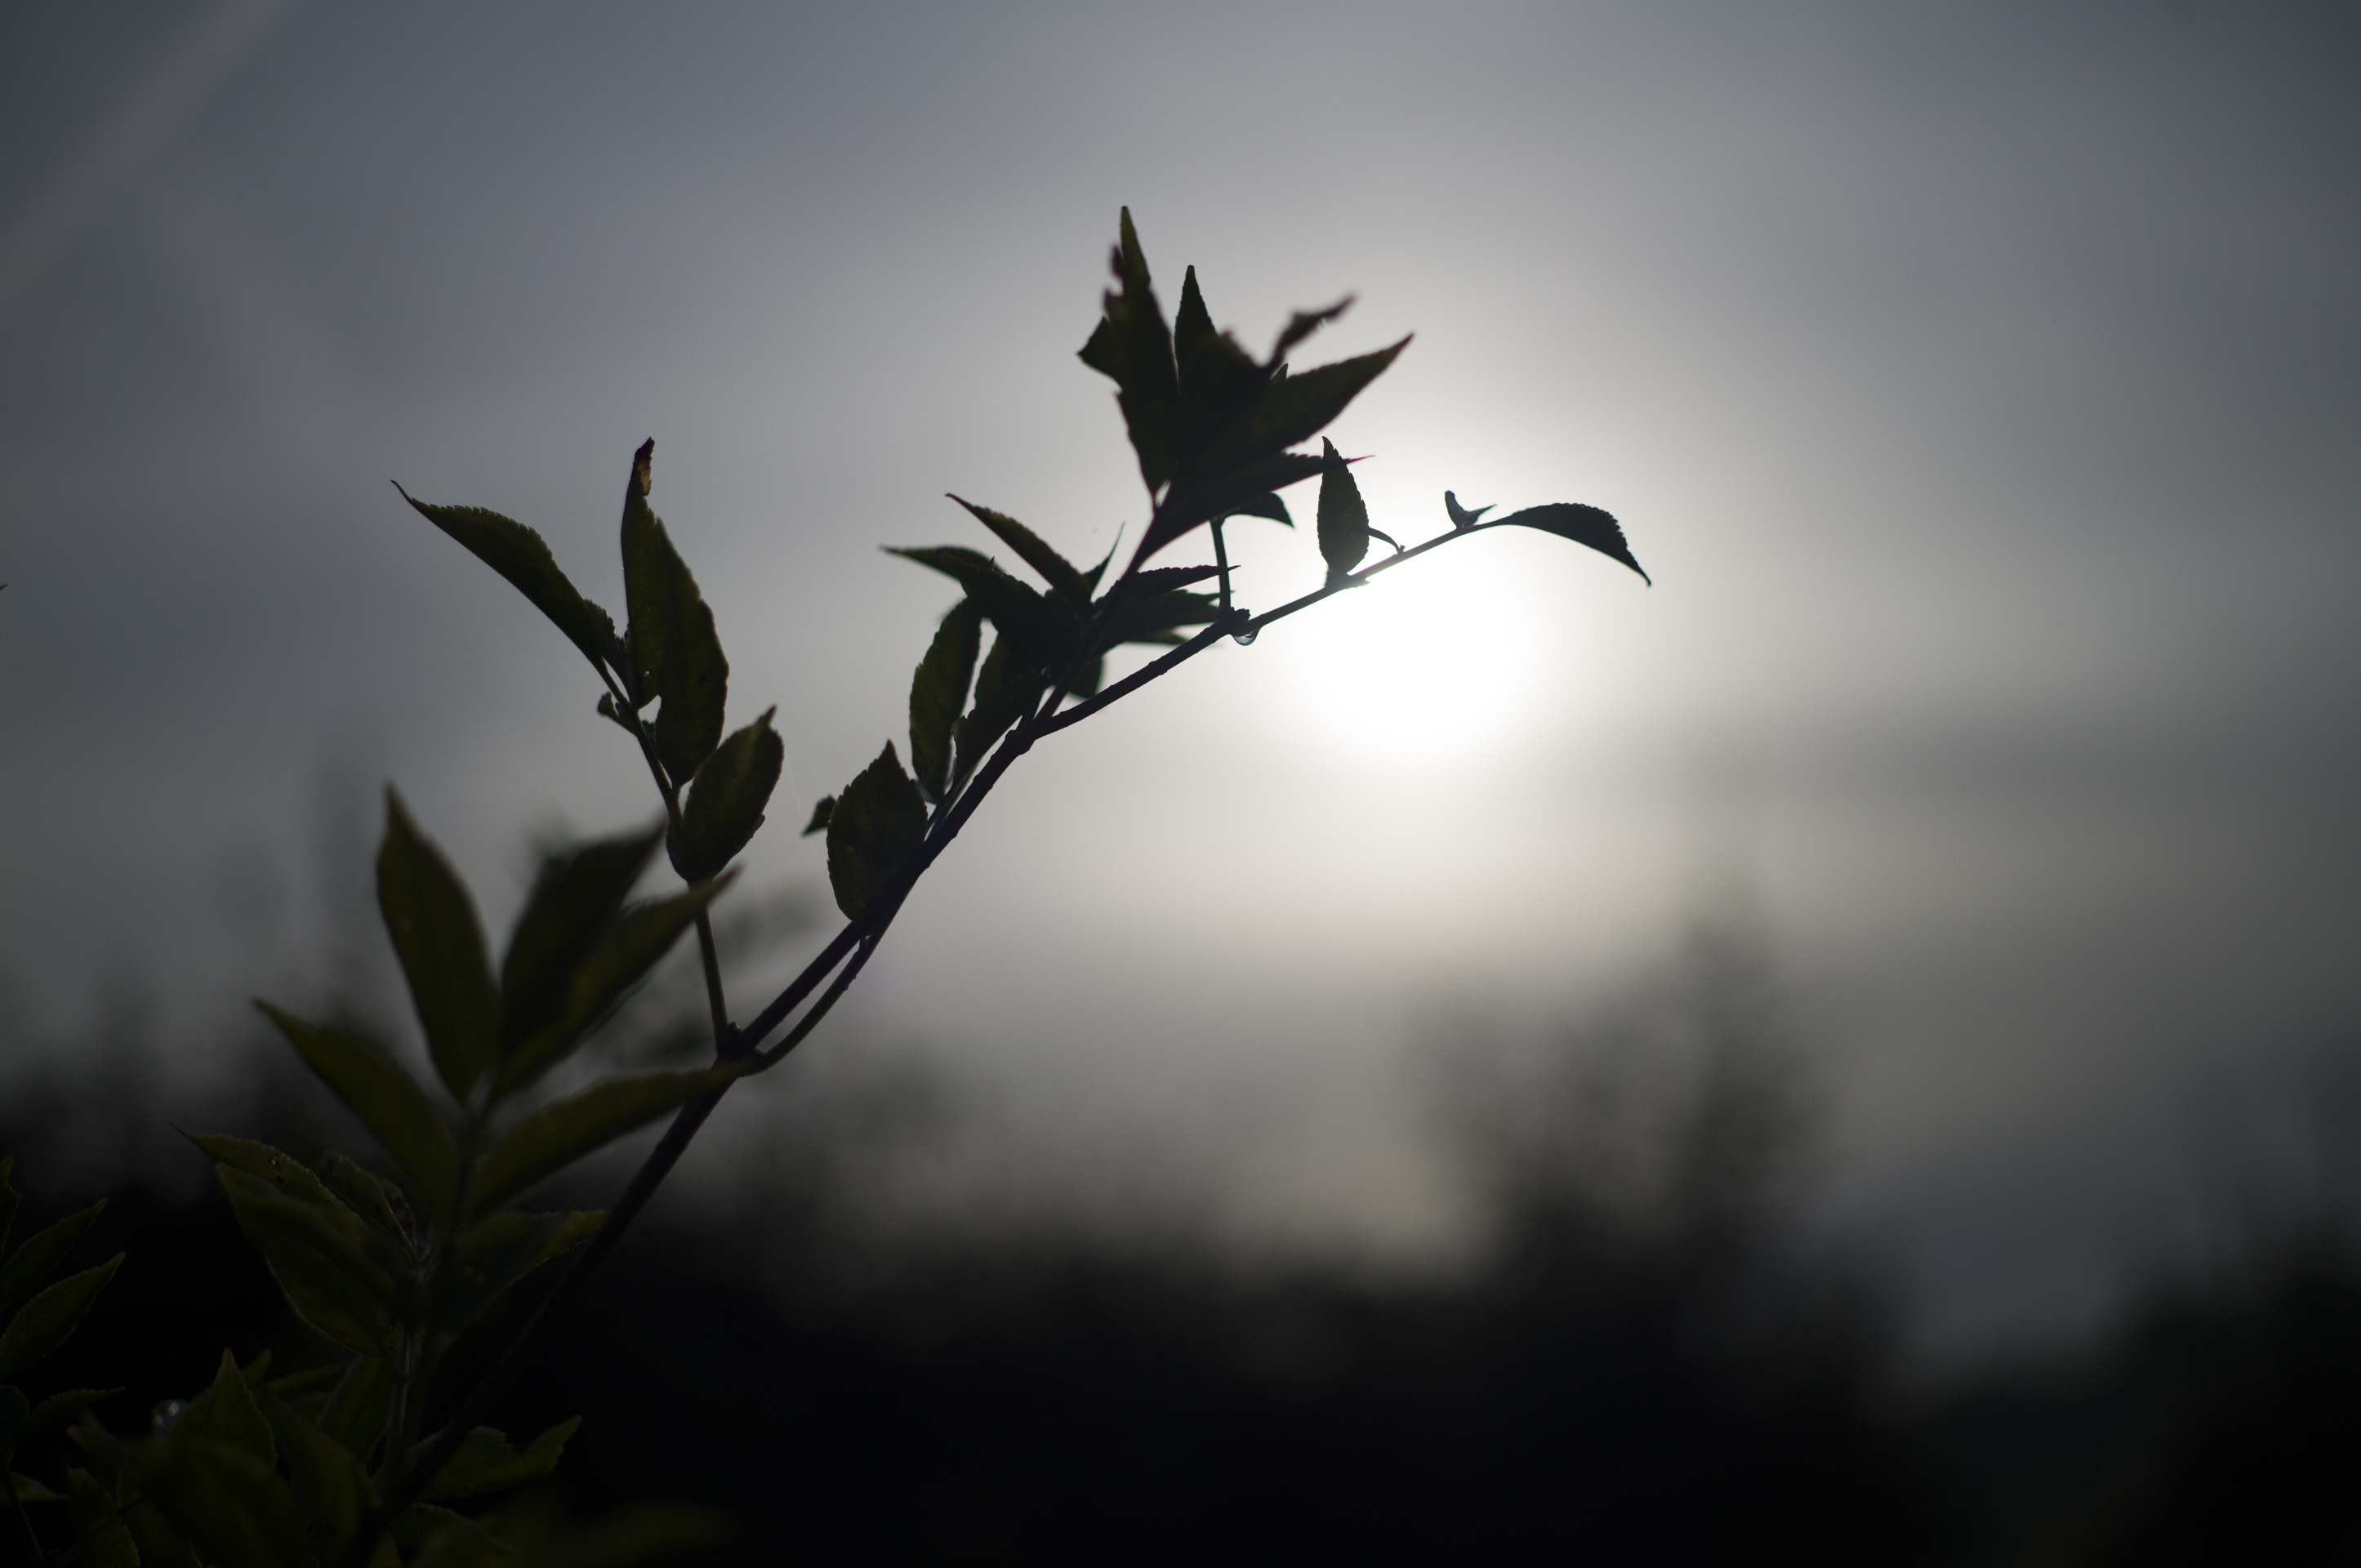 Backlit branch with dew droplet taken with Leica M11-P